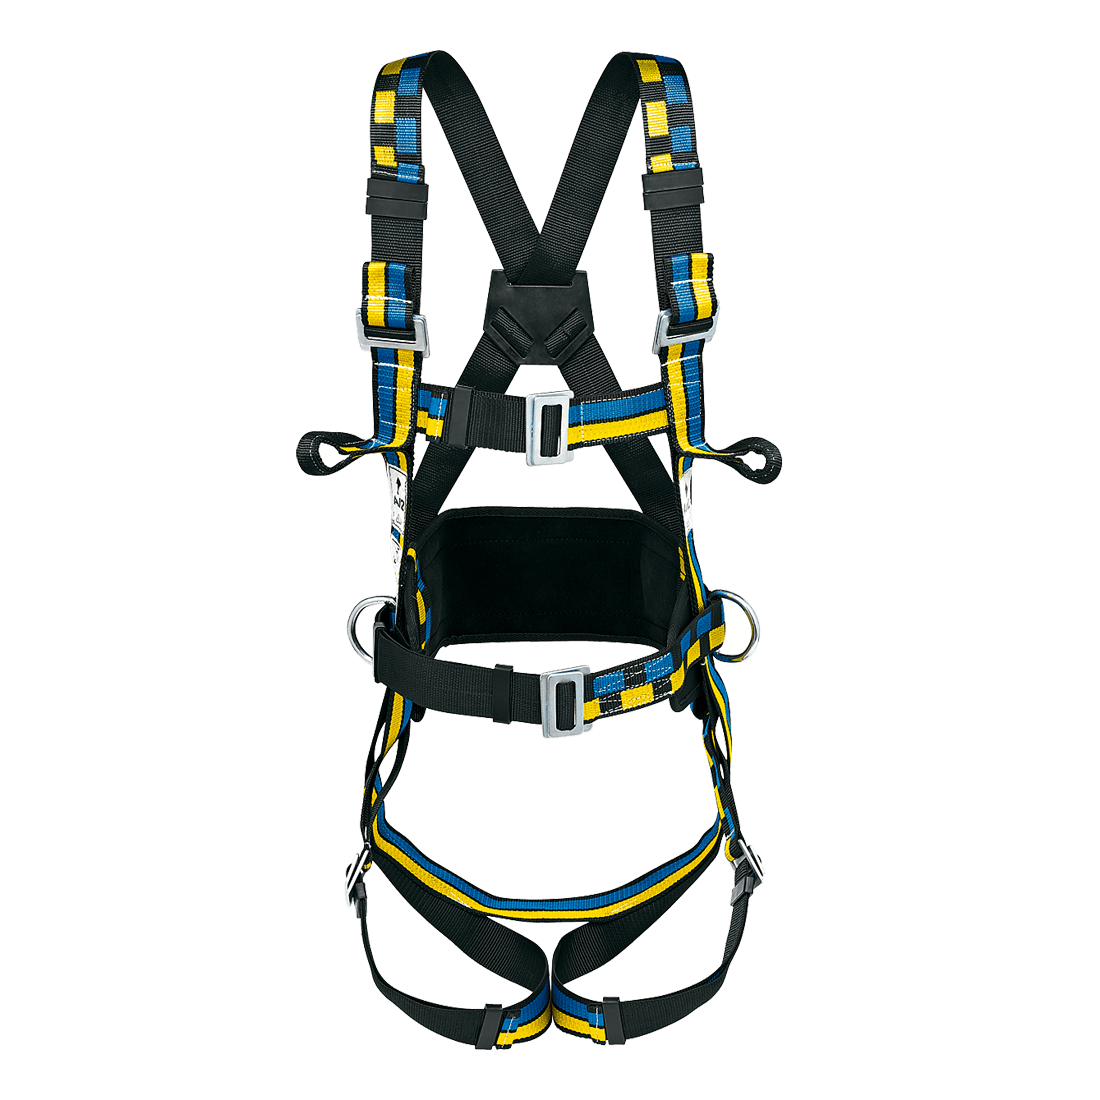 SOKOI 4 SAFETY HARNESS